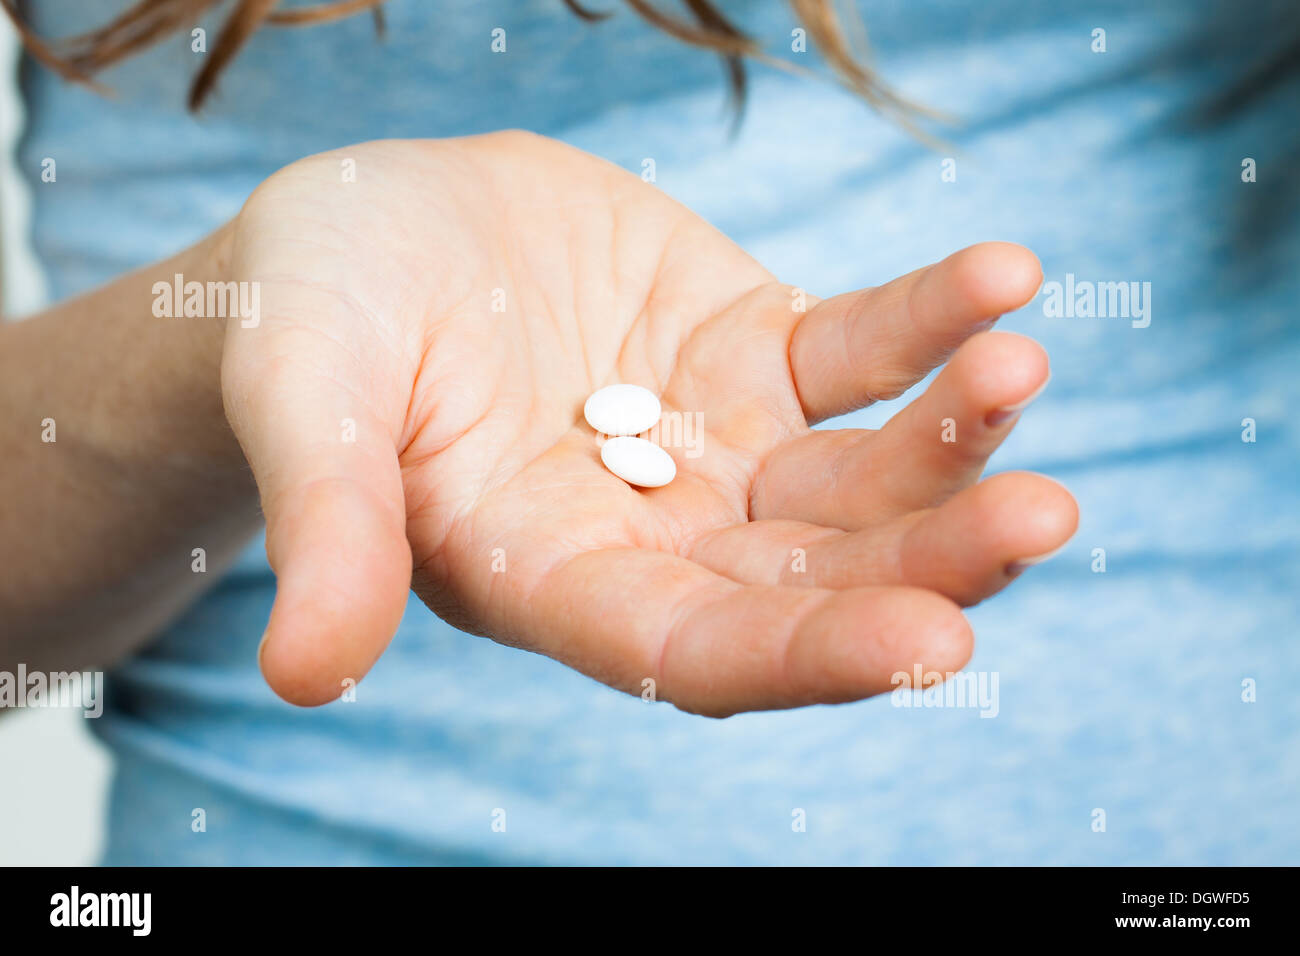 Close-up shot of a hand holding two white pills. Stock Photo